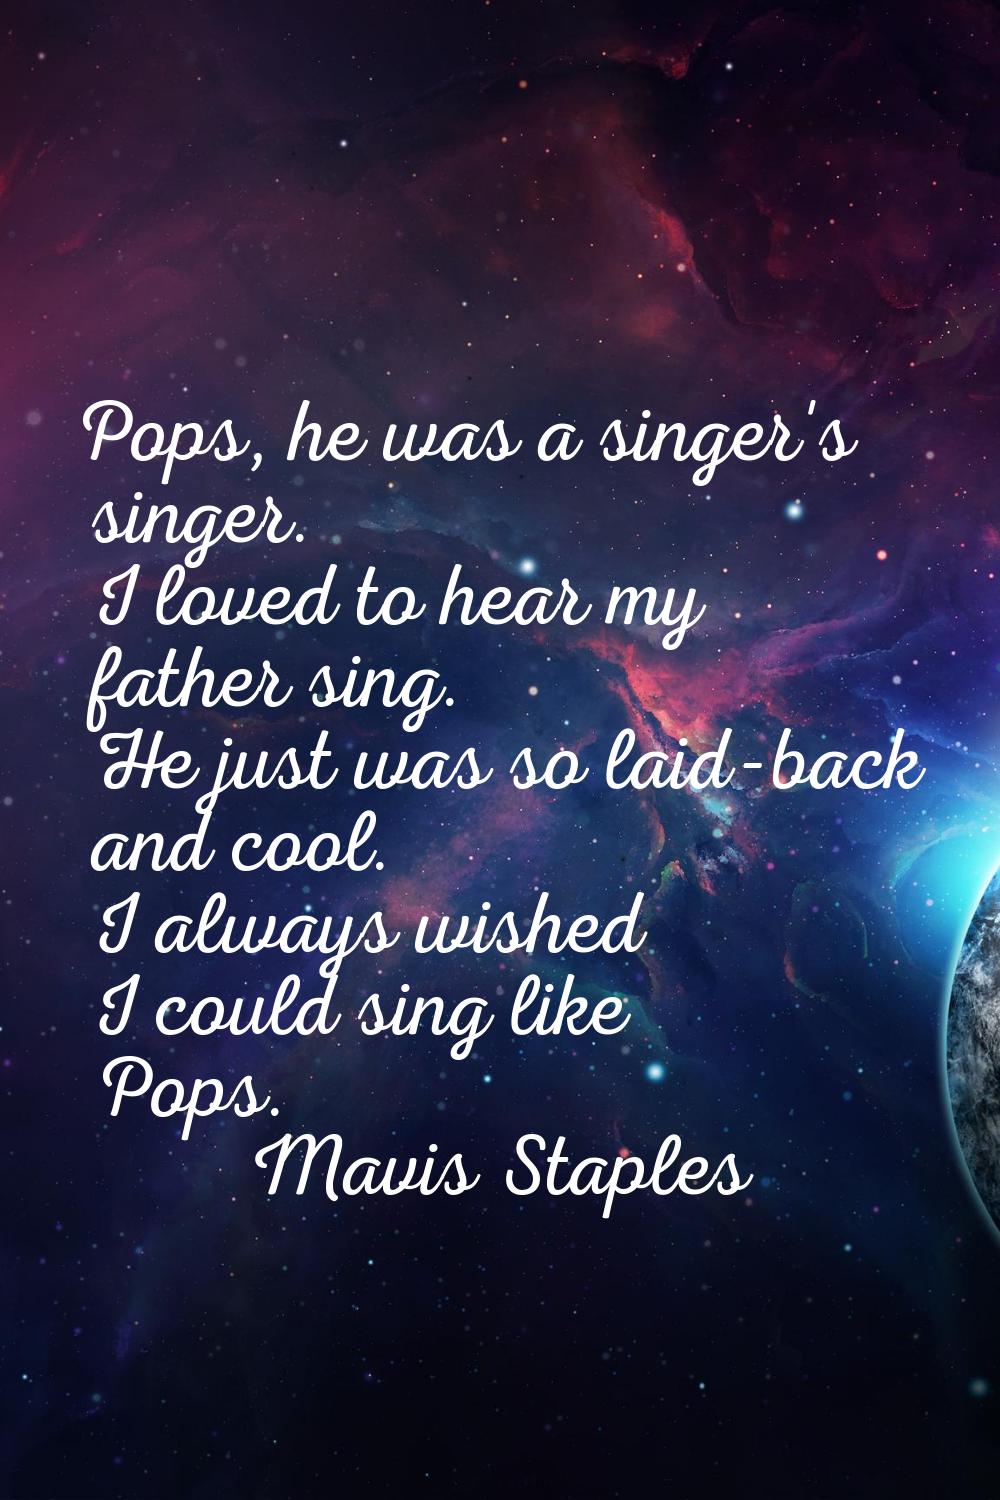 Pops, he was a singer's singer. I loved to hear my father sing. He just was so laid-back and cool. 